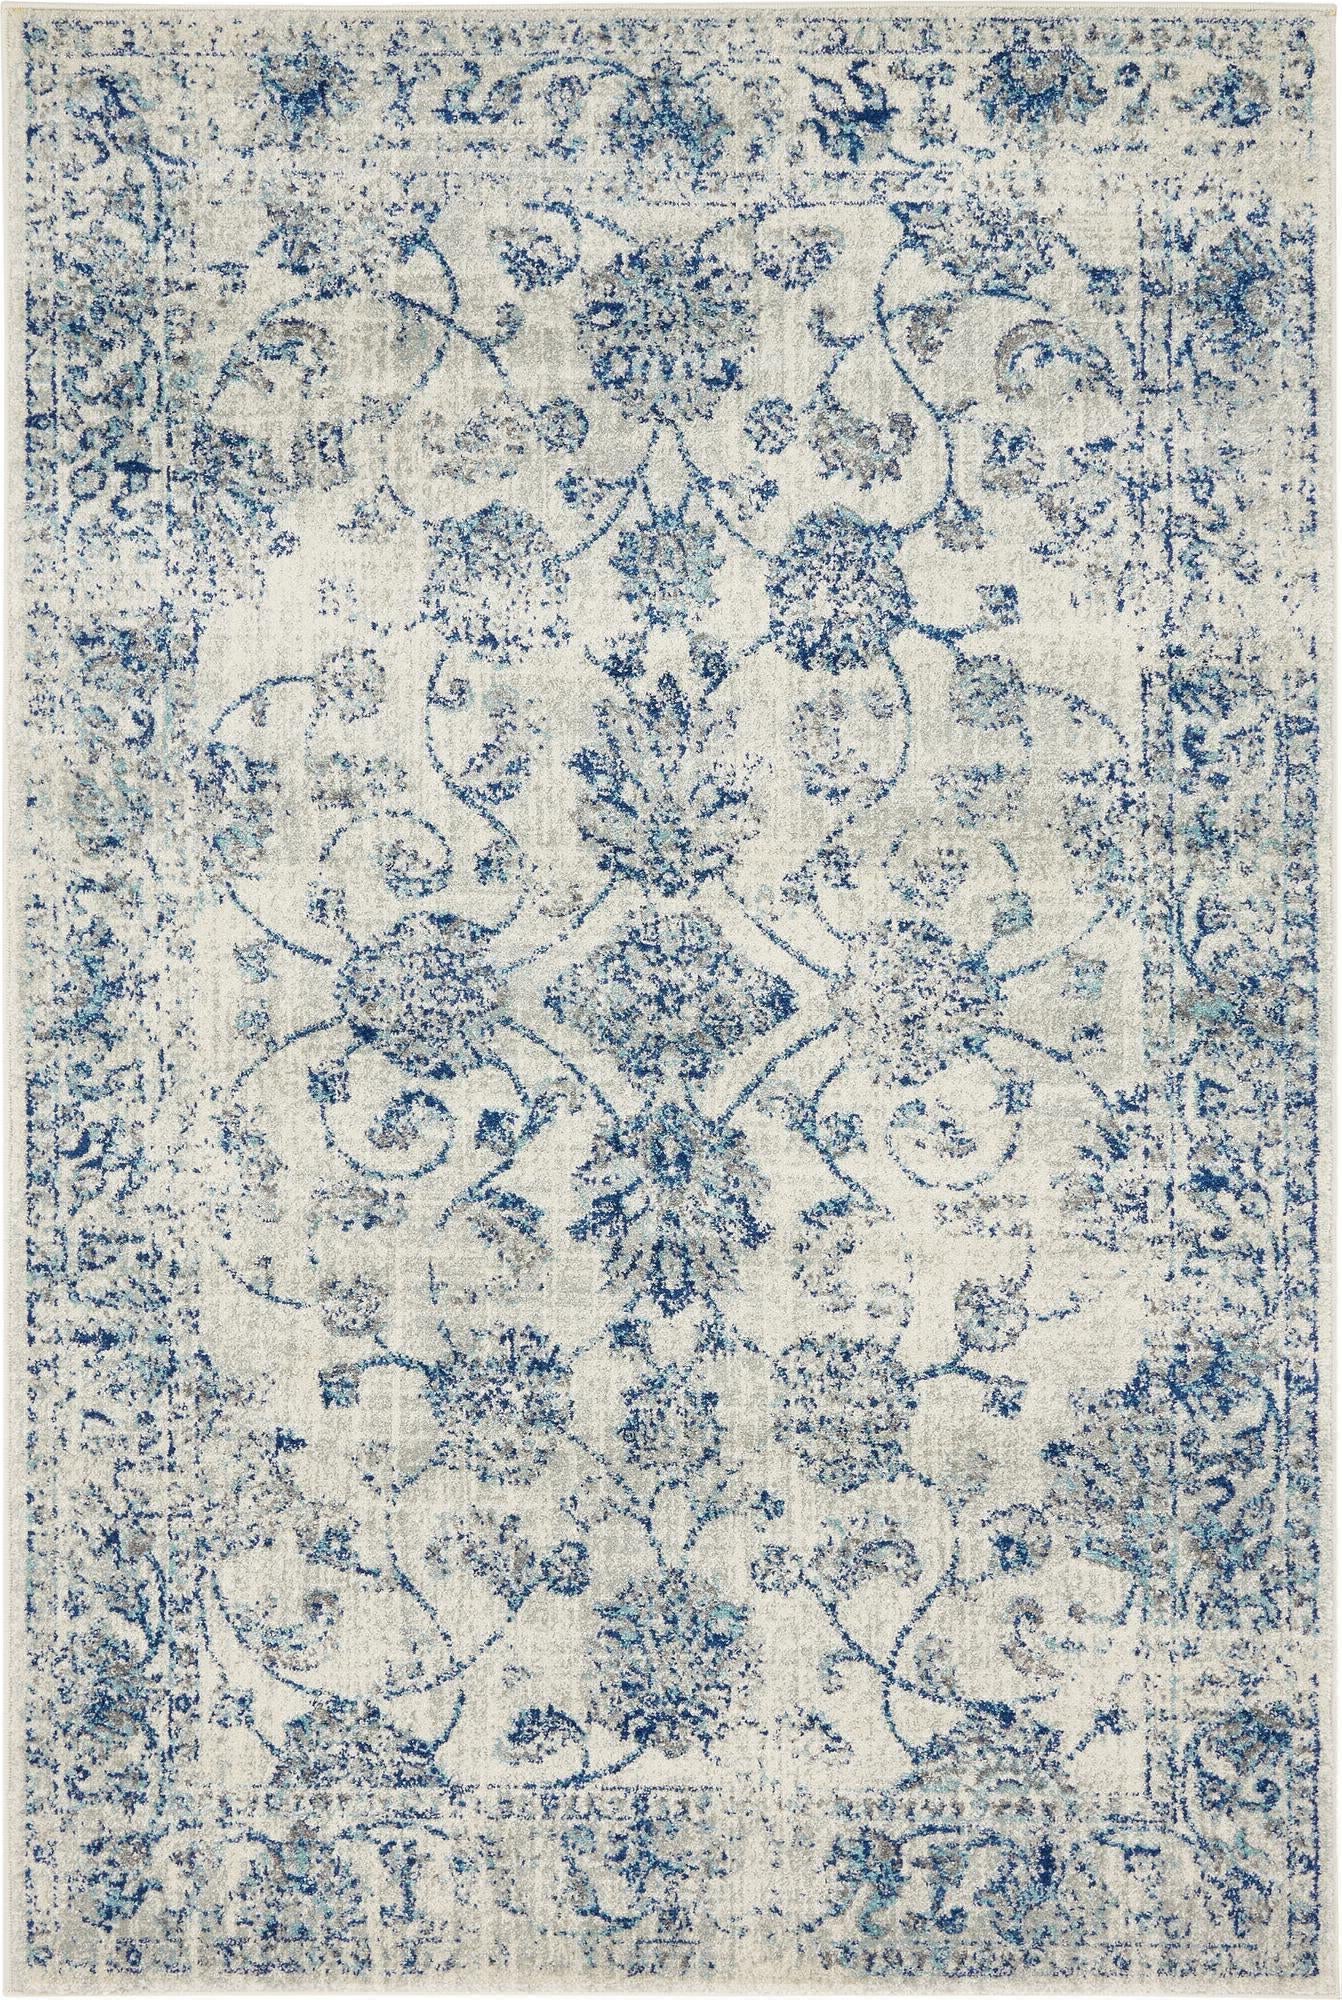 Unique Loom Tradition T-Heritage-5257a Beige Area Rug main image